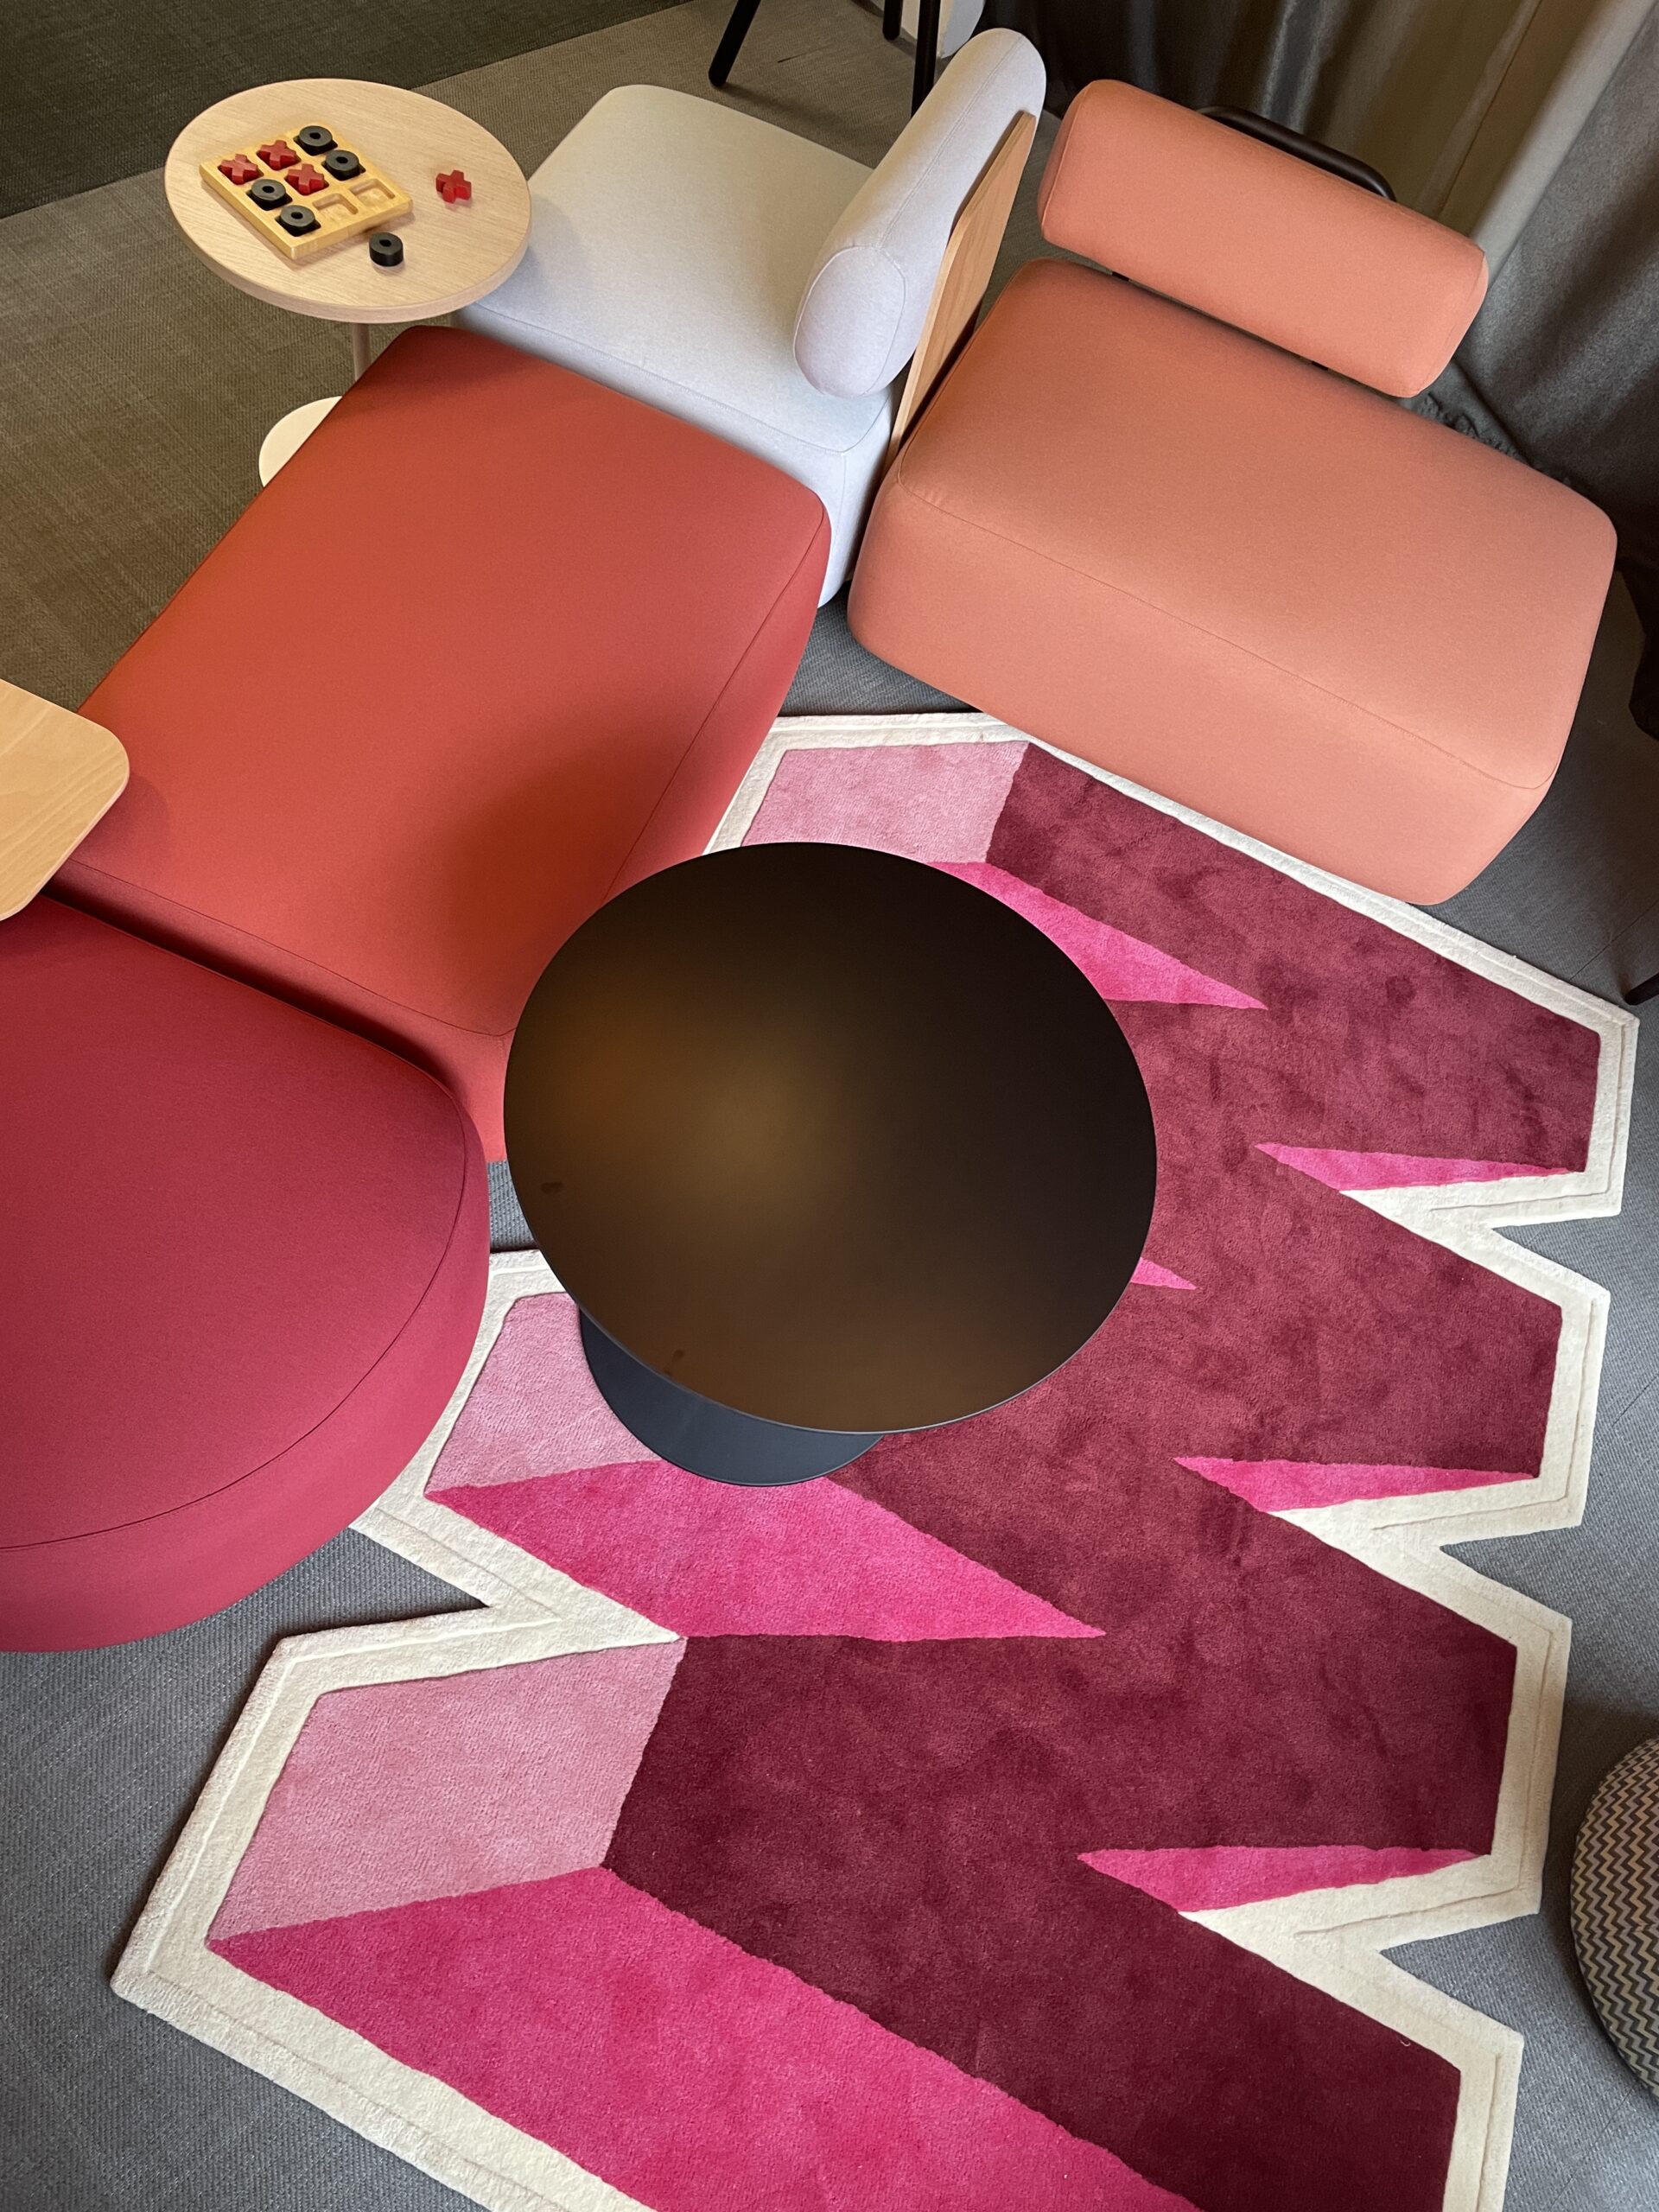 Oooh Peachy! How Does Colour Impact Workplace Design?